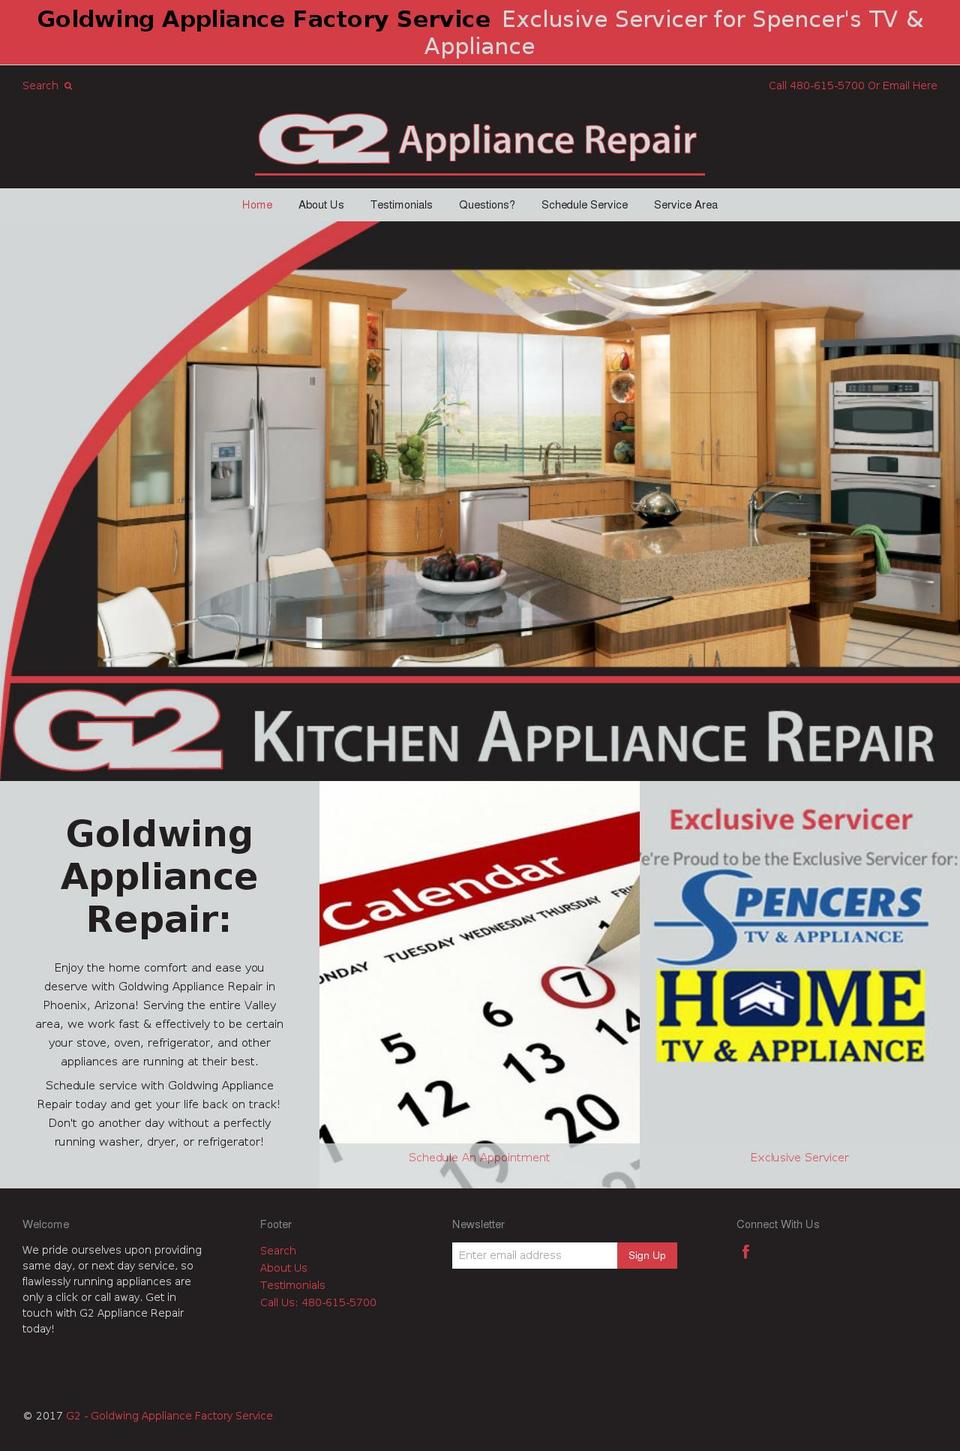 Weekend Shopify theme site example g2applianceservice.com